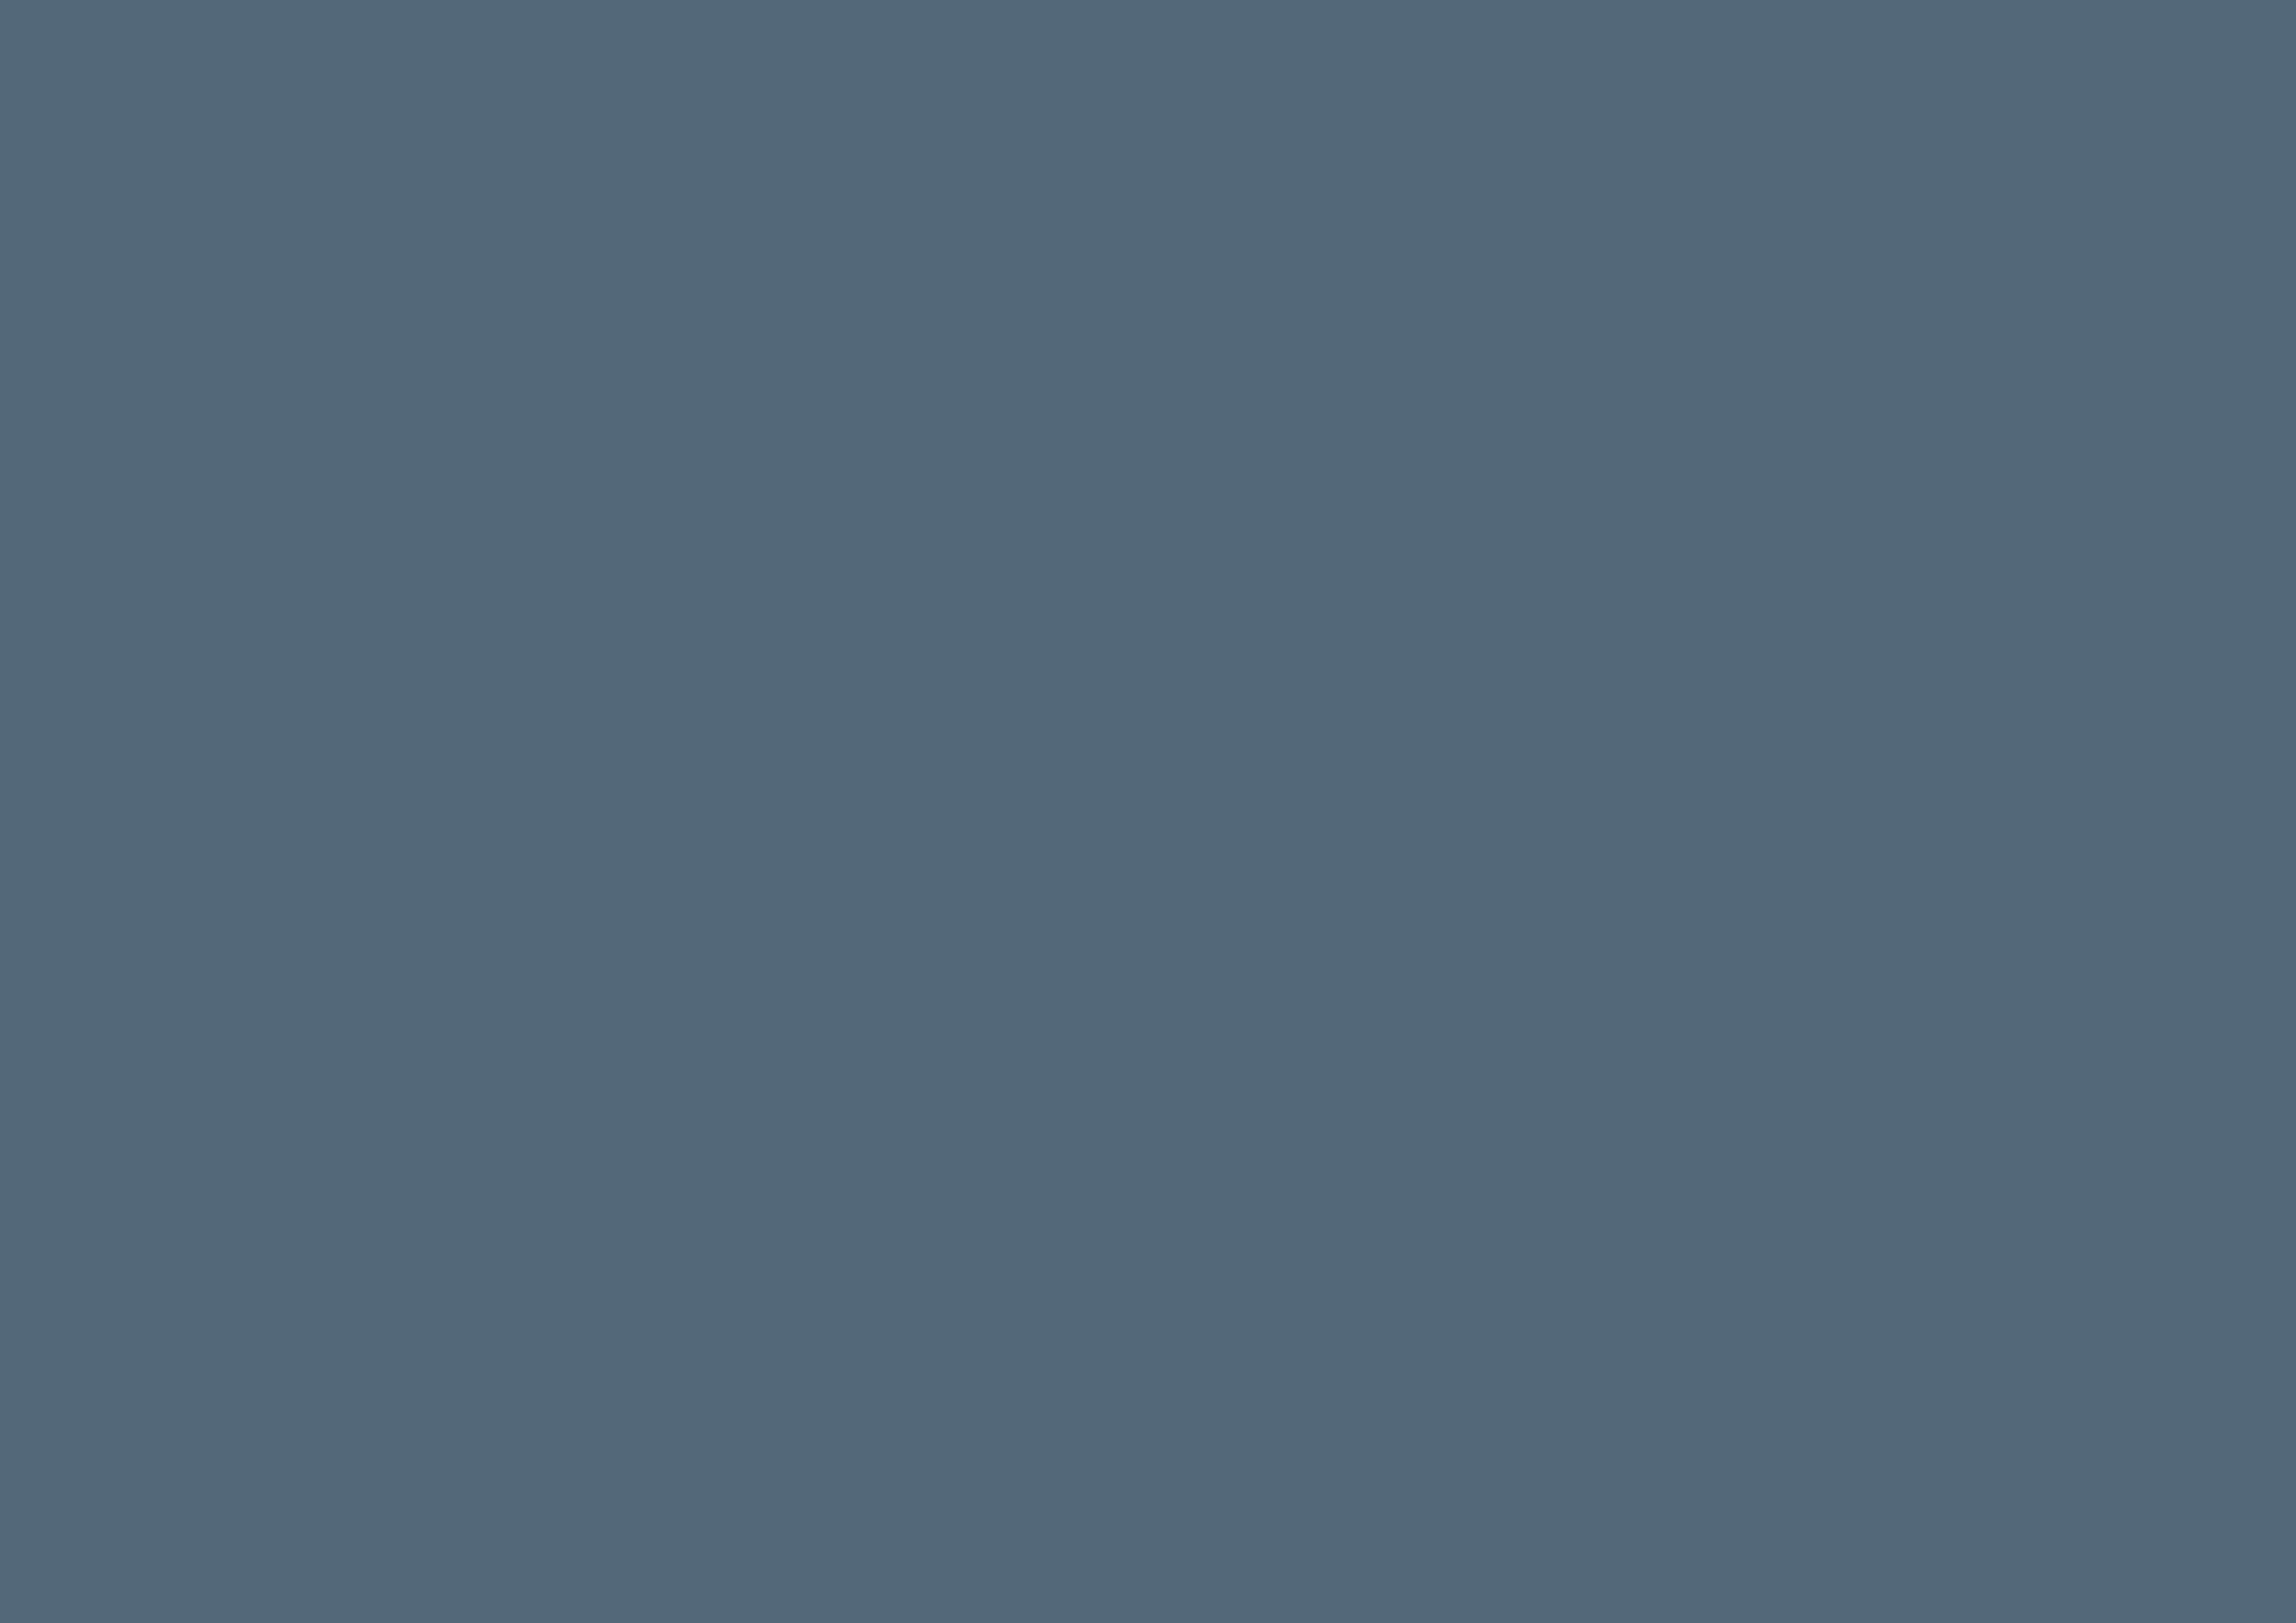 3508x2480 Paynes Grey Solid Color Background